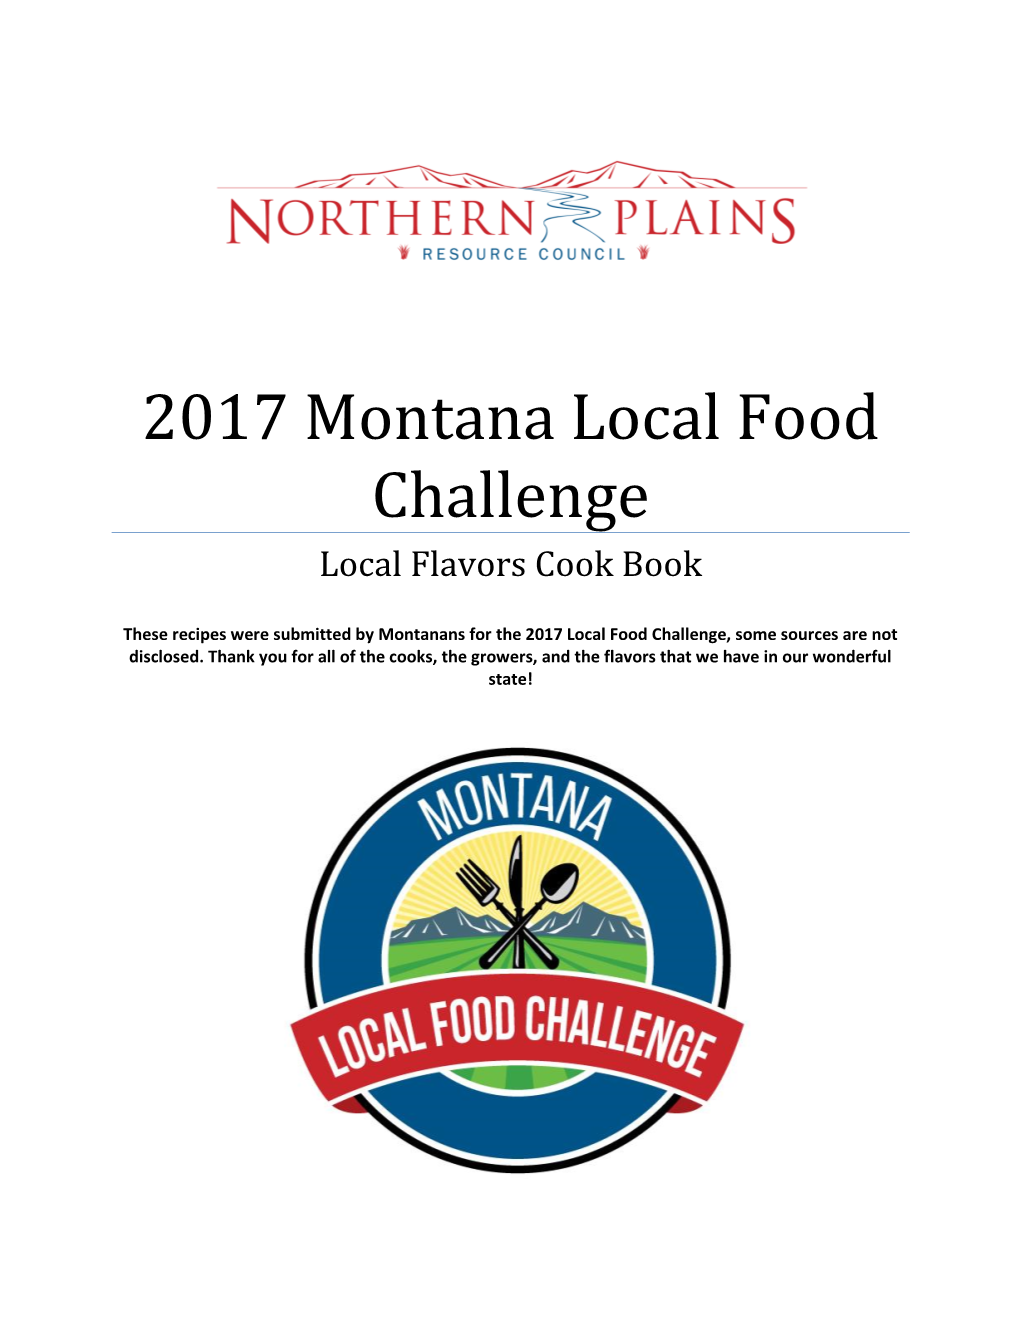 2017 Montana Local Food Challenge Local Flavors Cook Book